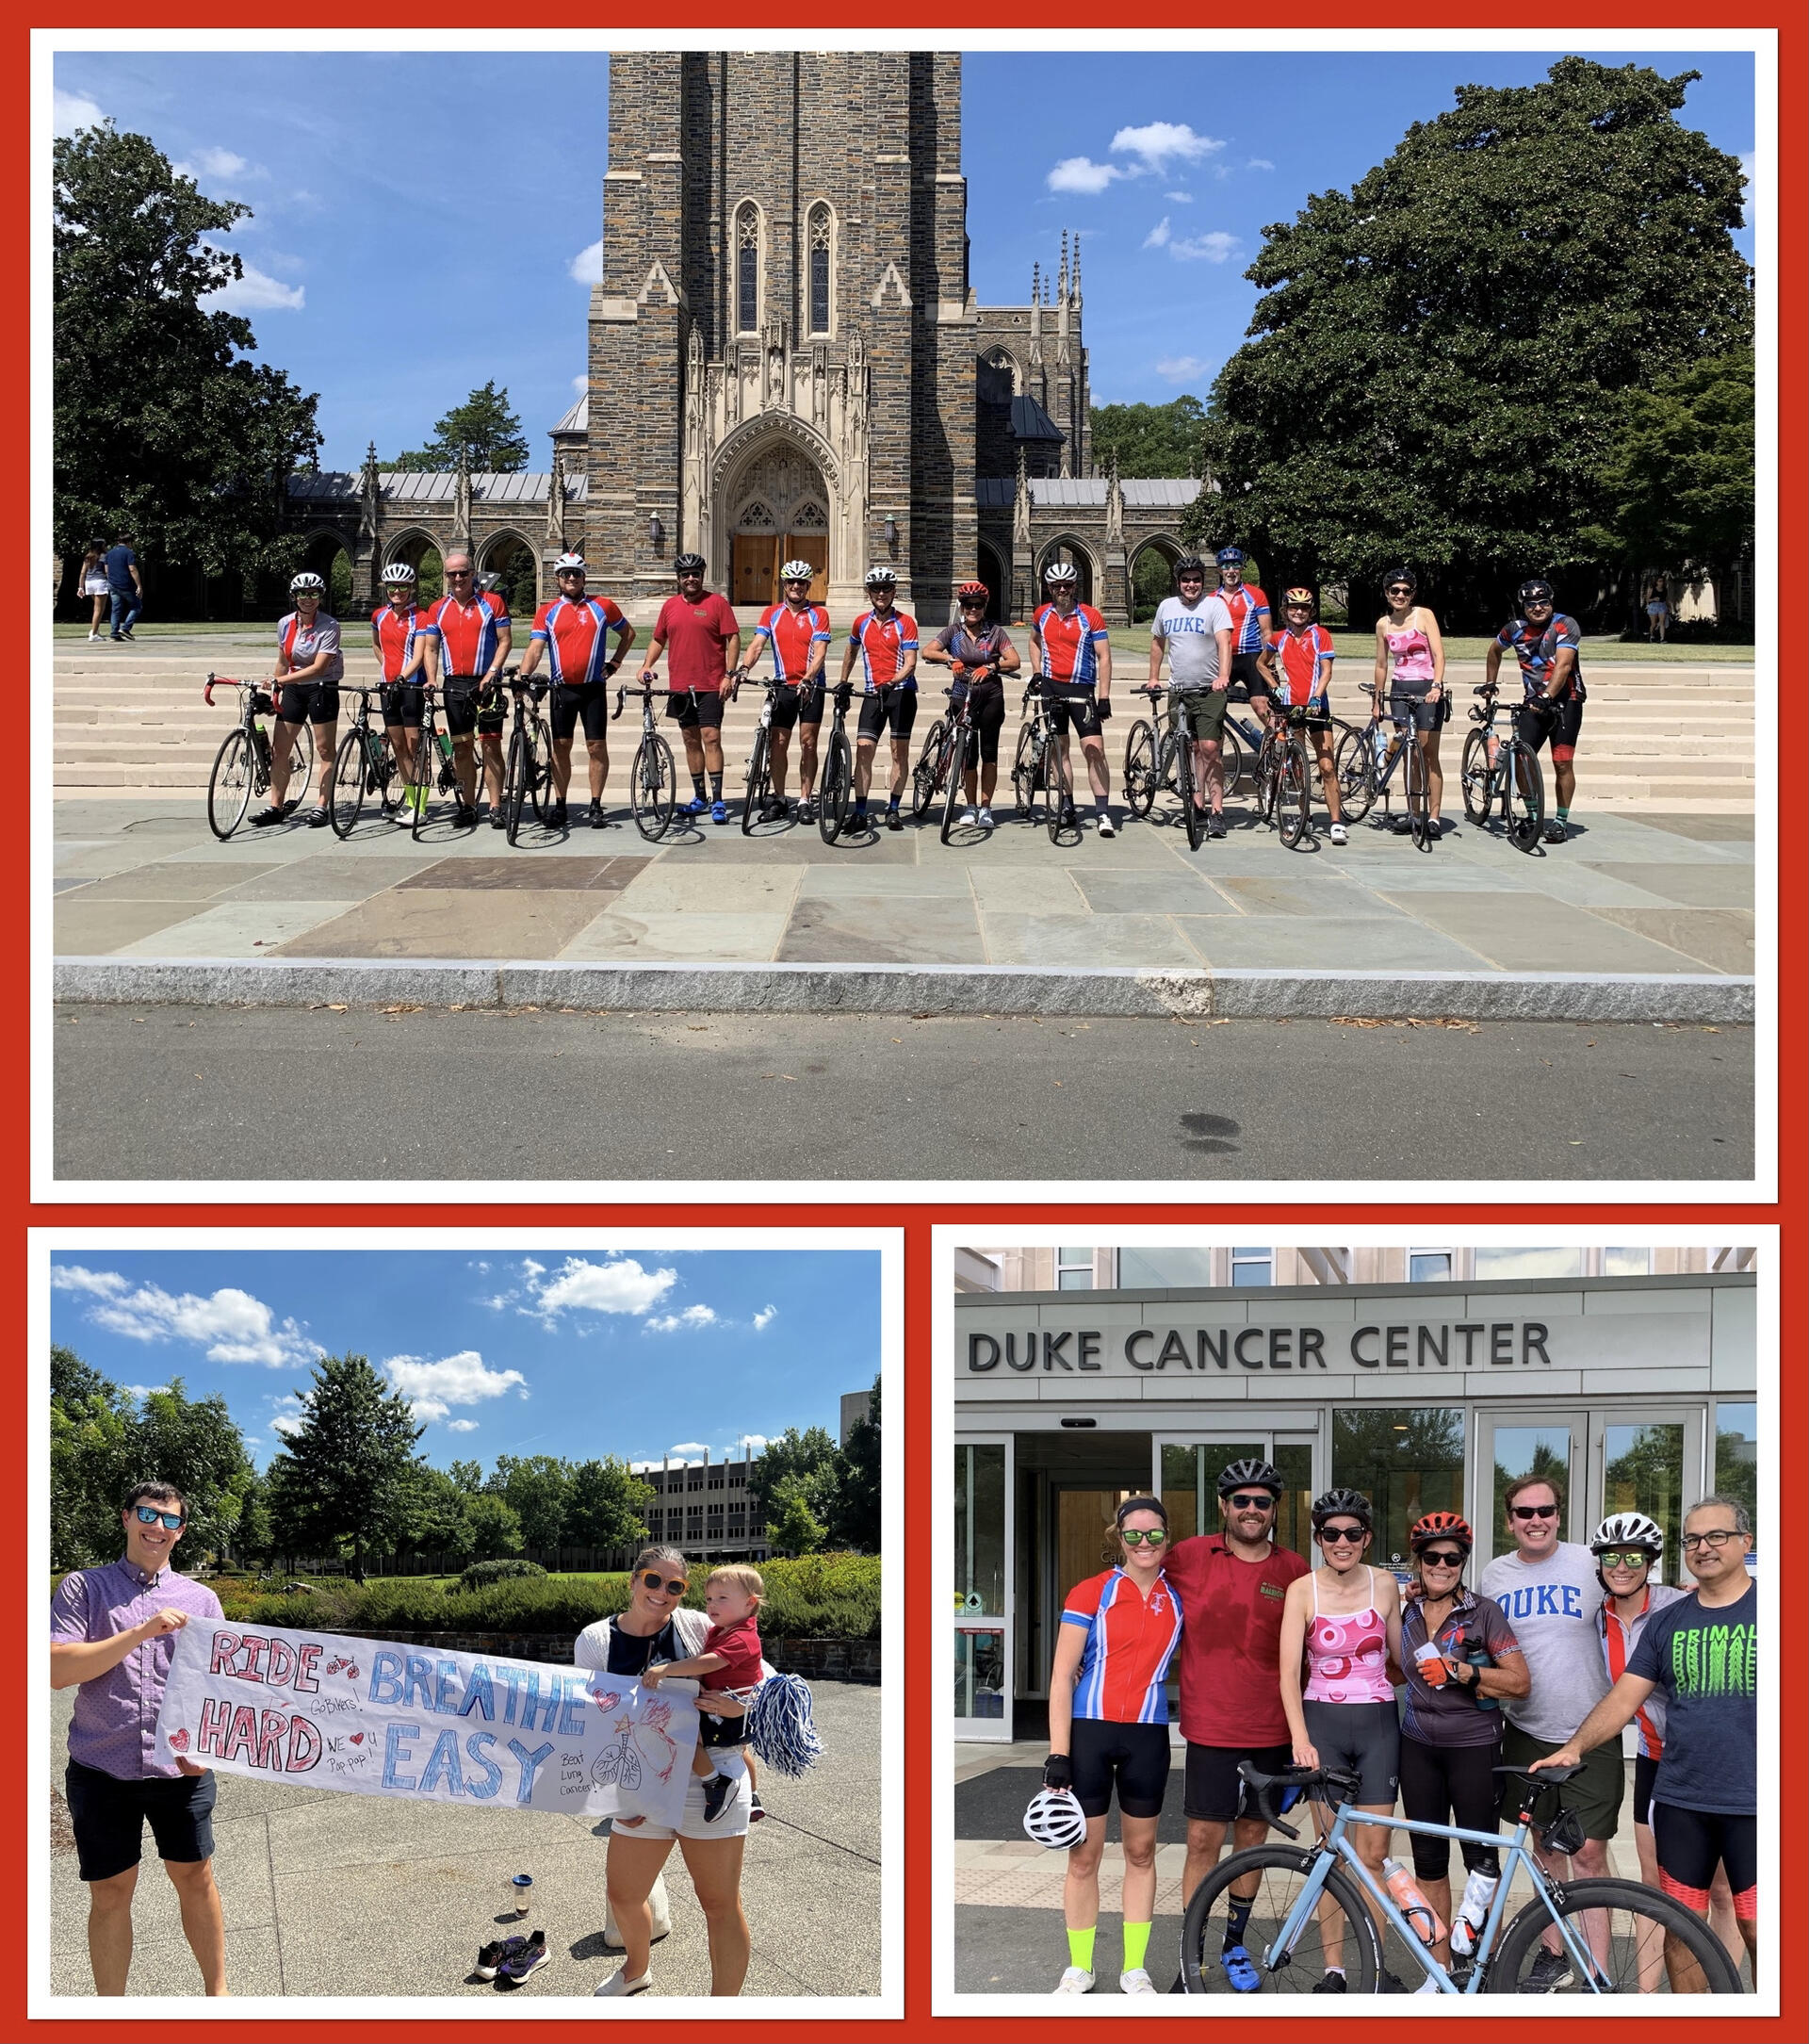 Three photos are grouped together. On top, a row of cyclists stand beside their bikes and in front of Duke Chapel. In photo 2, a man and woman (who is holding a baby) hold a banner. In photo 3, a group of 7 cyclists stand in front of Duke Cancer Center.